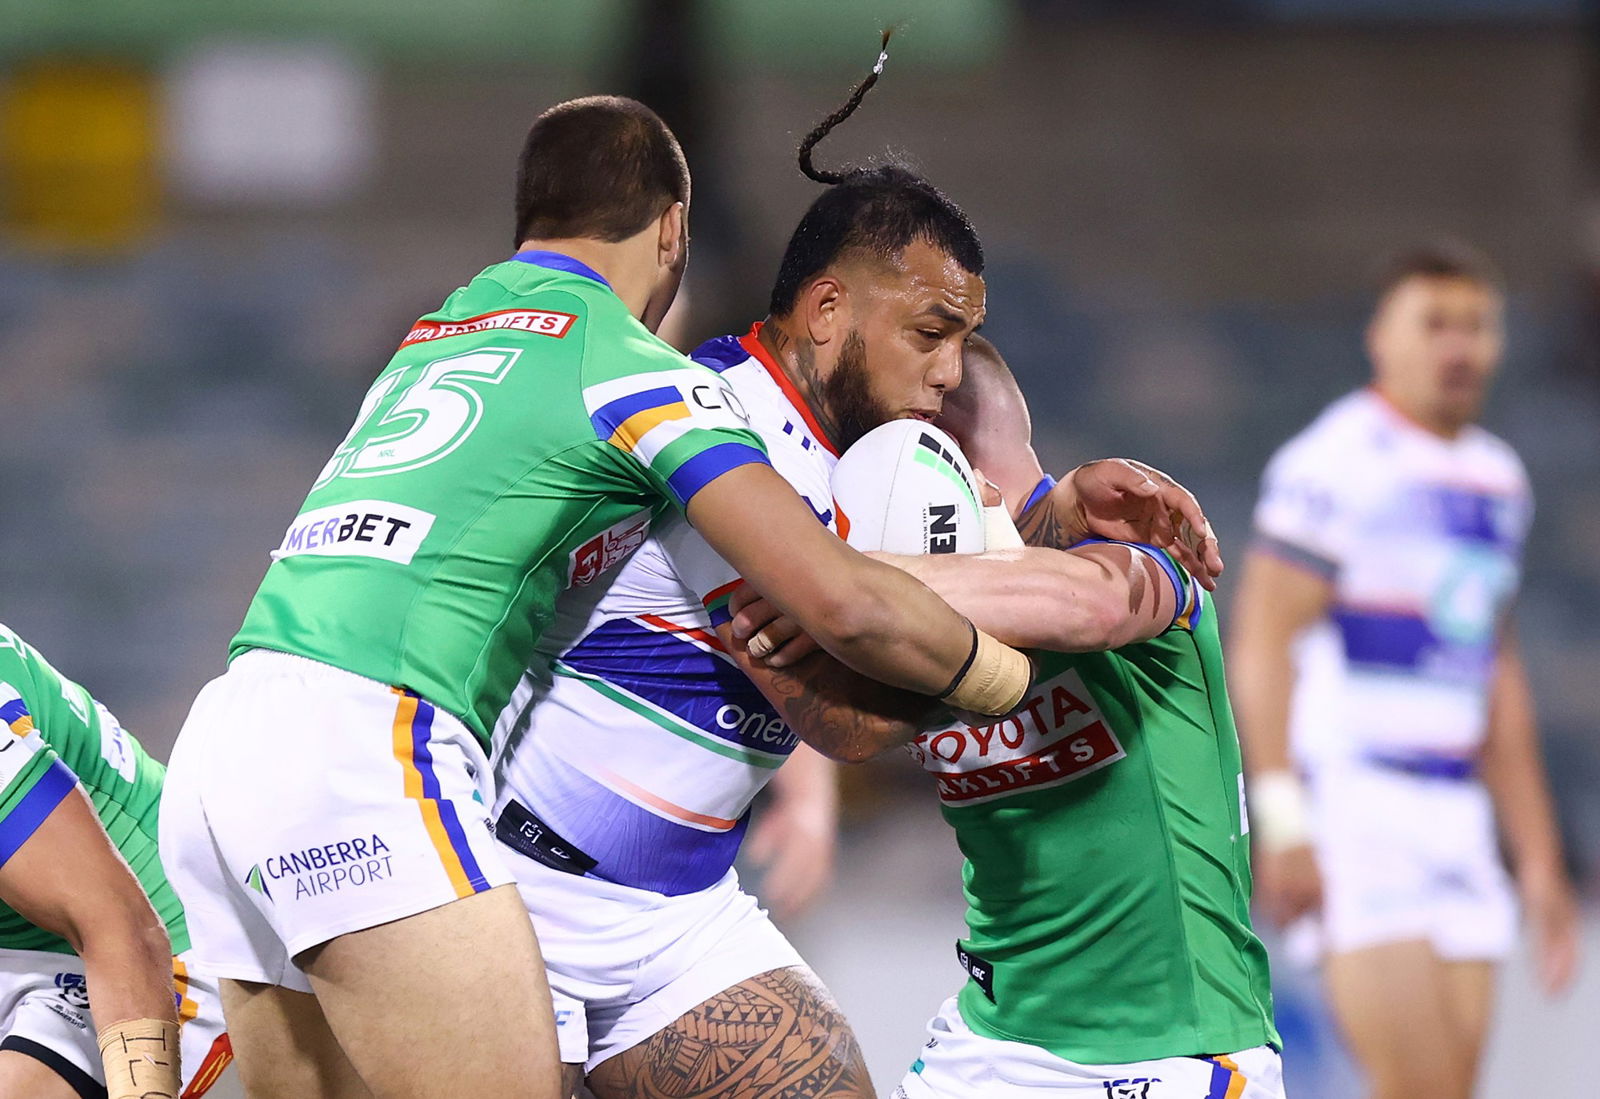 A Warriors players is tackled by two Raiders players.